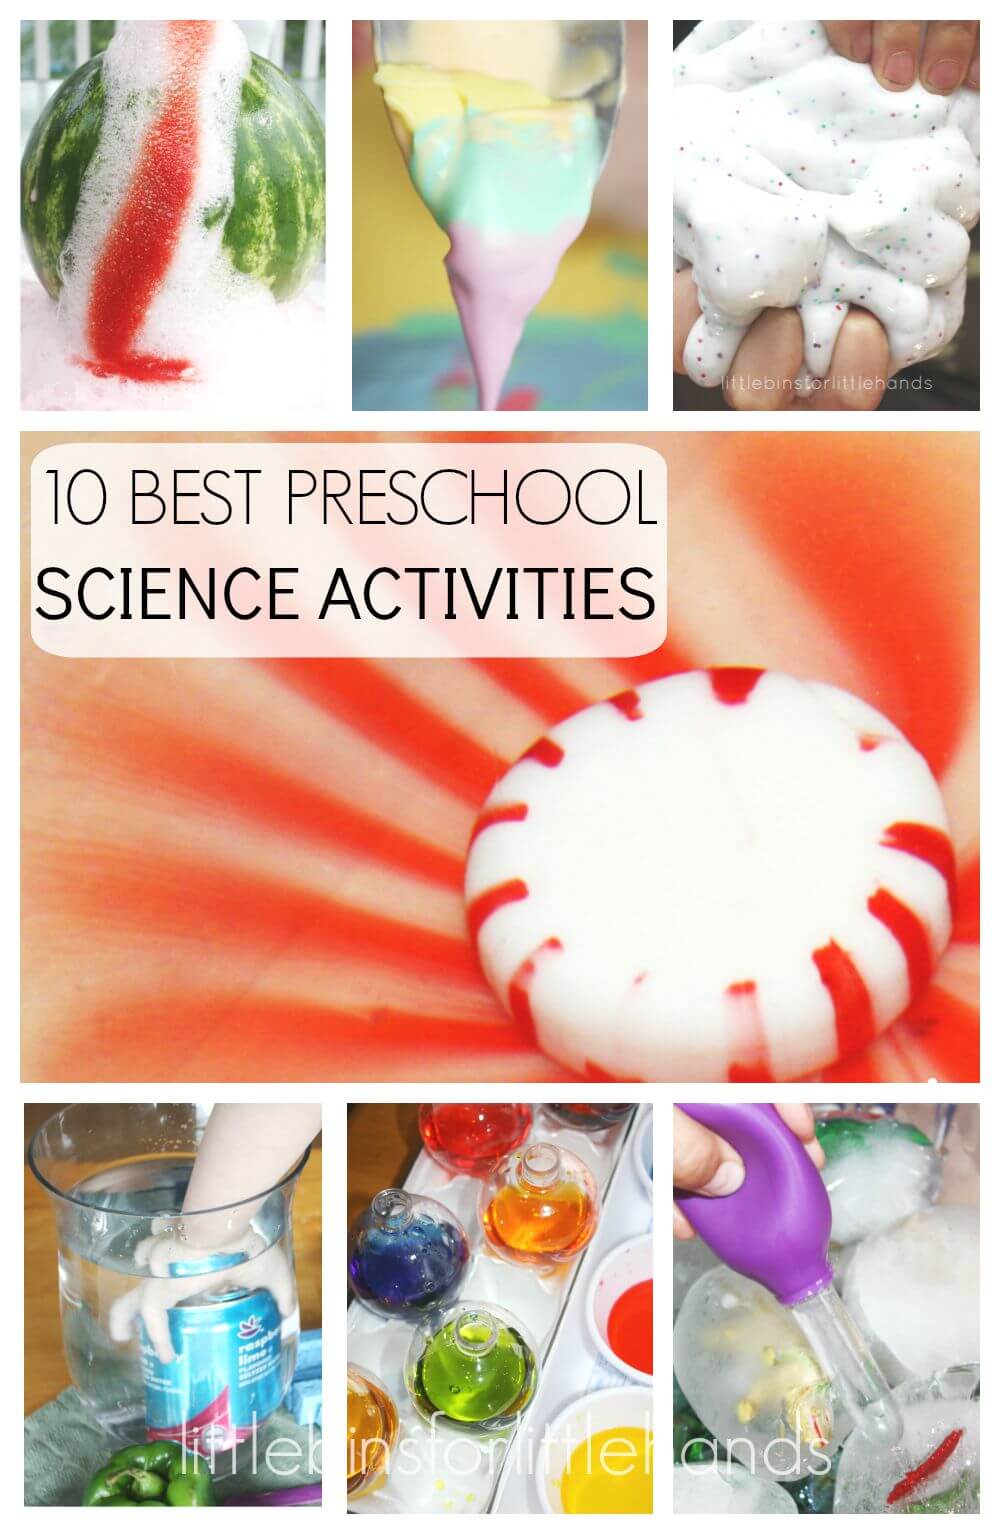 30 Science Activities for Preschoolers That are Totally 